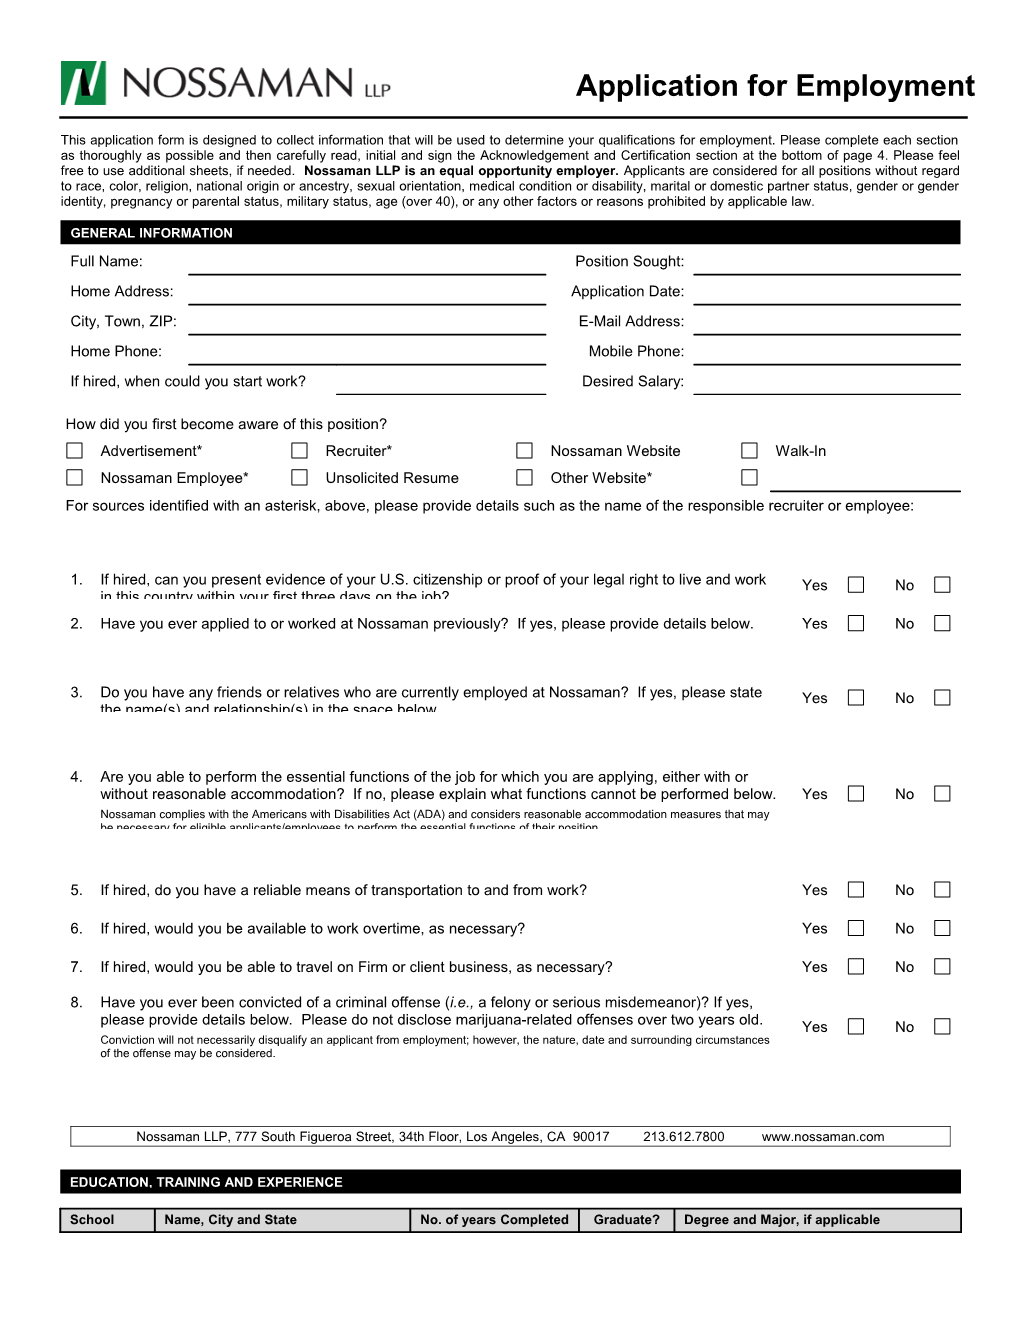 This Application Form Is Designed to Collect Information That Will Be Used to Determine